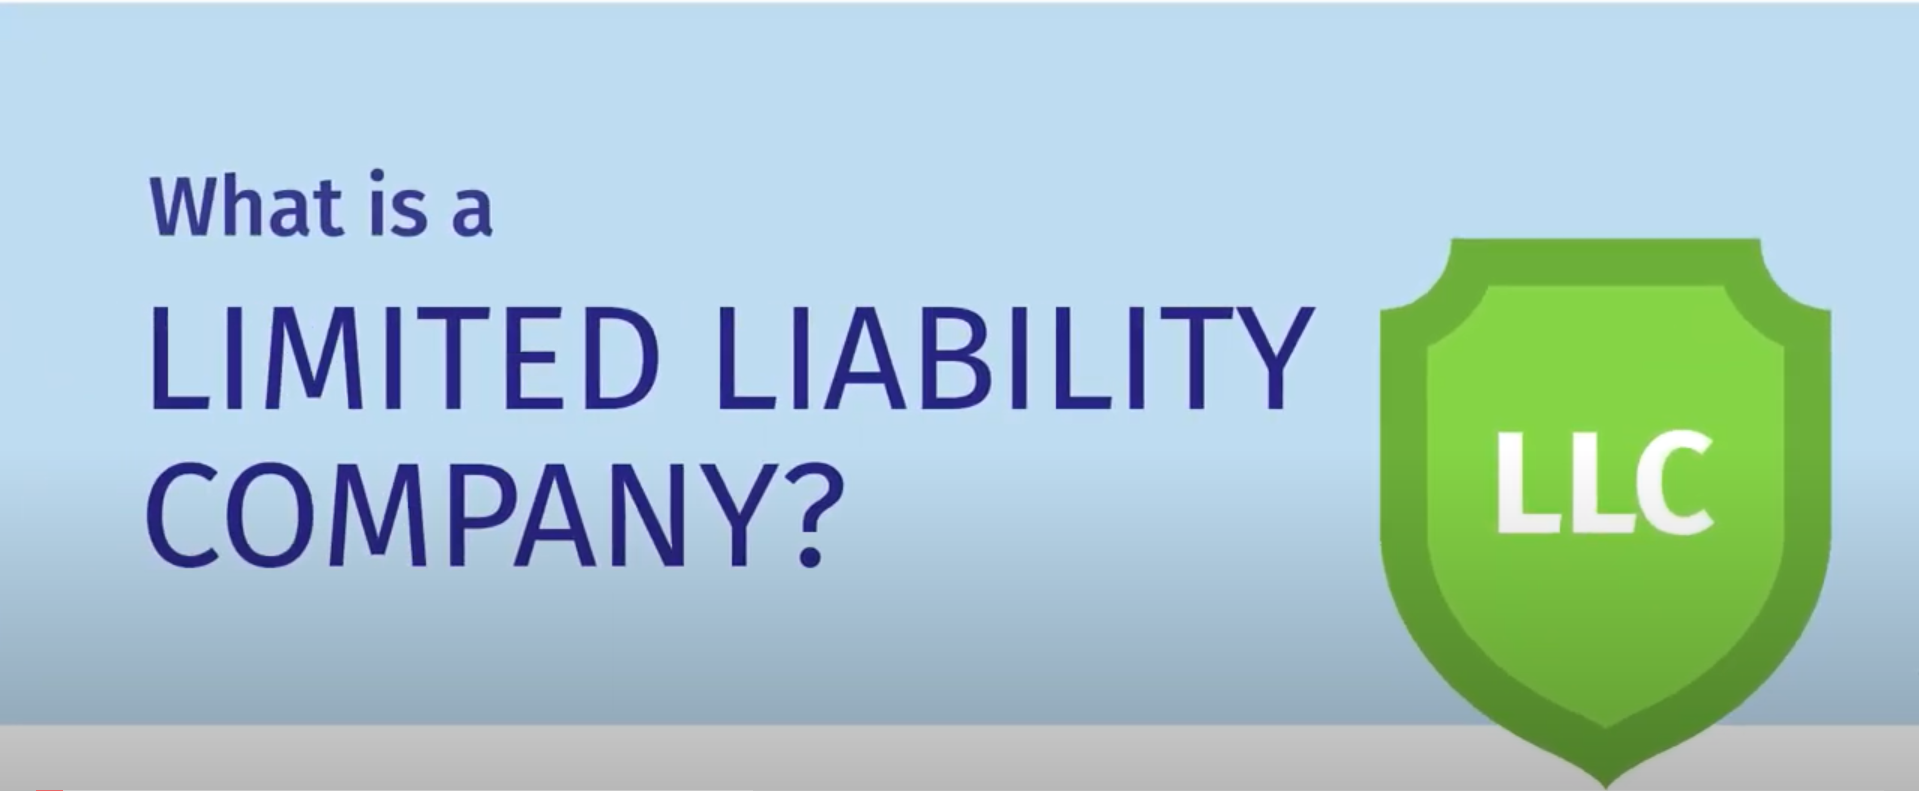 what is a limited liability company